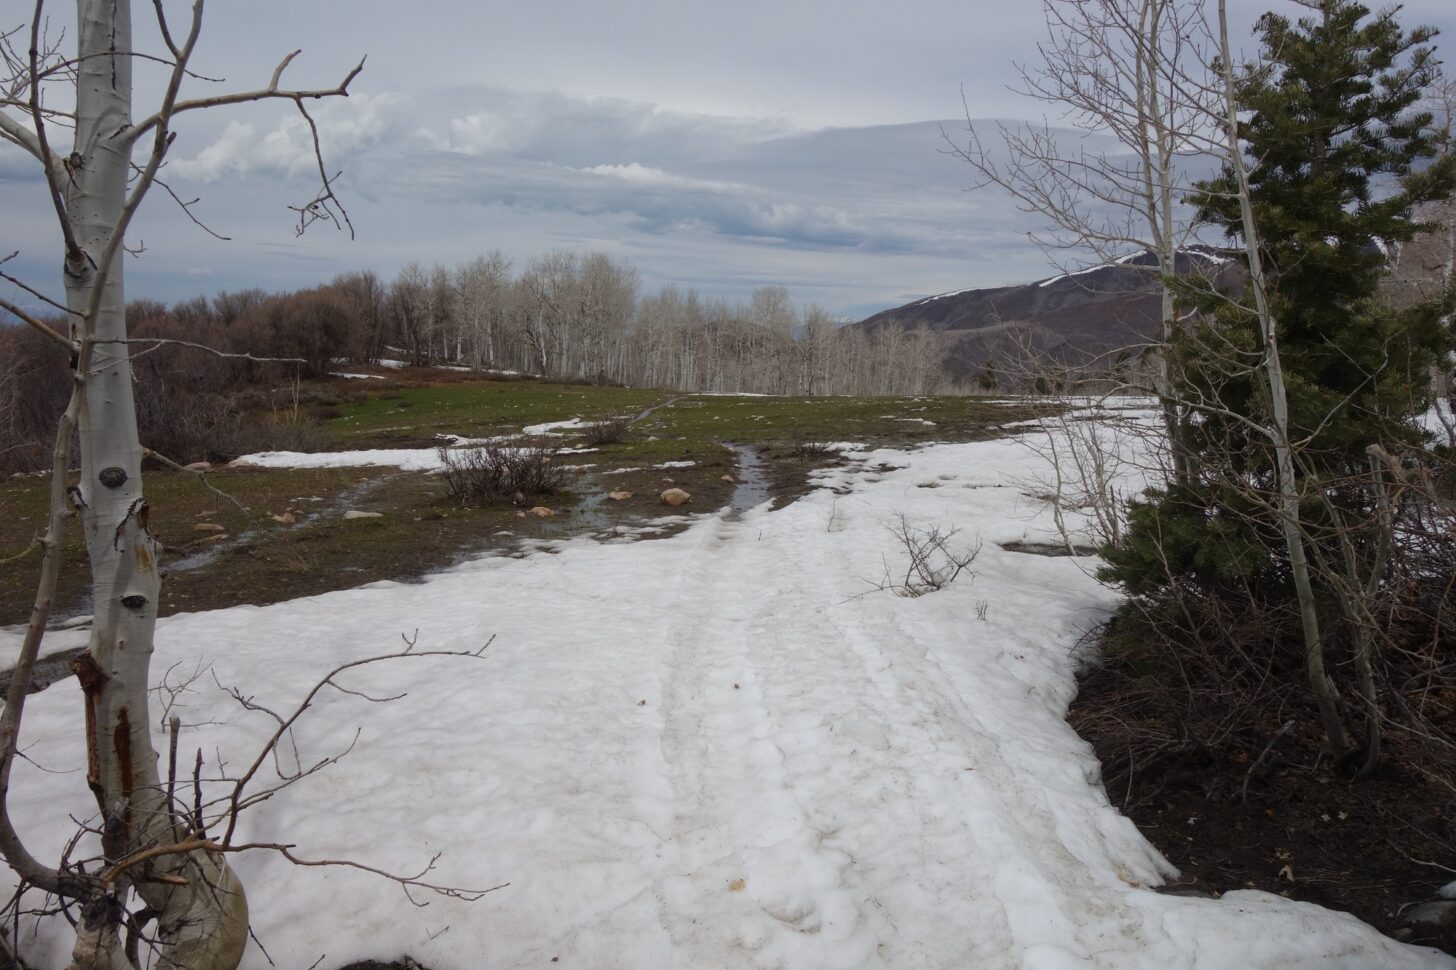 If you have naturalist inclinations, you too will be slip-sliding though snow and mud in transition season.